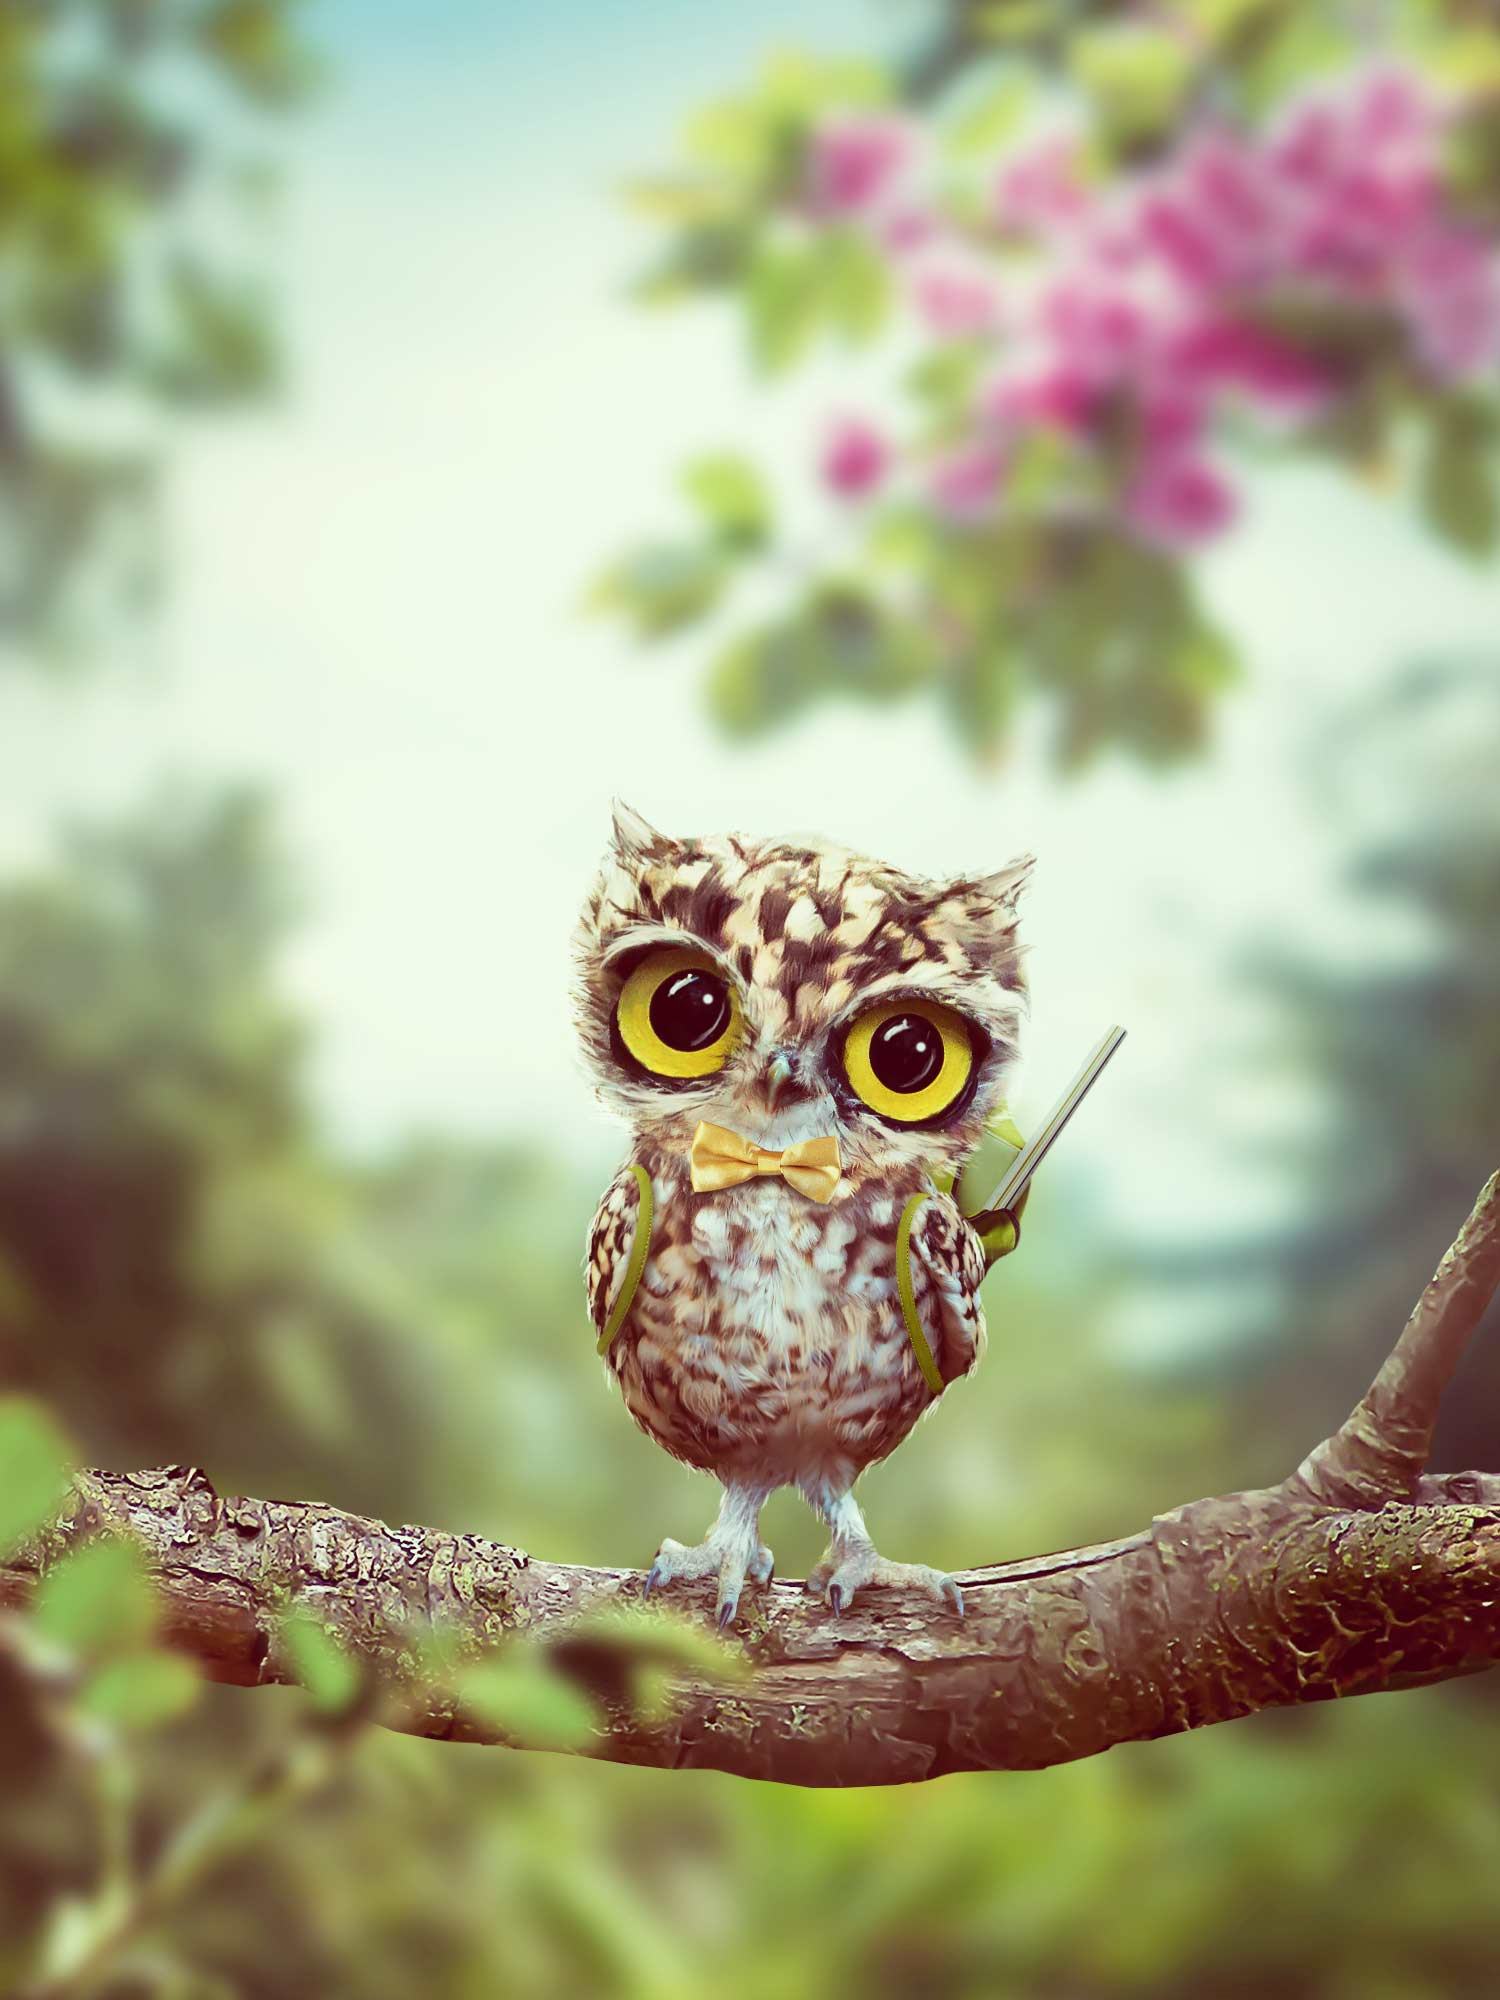 How to Create a Fantasy Owl Photo Manipulation with Adobe Photoshop